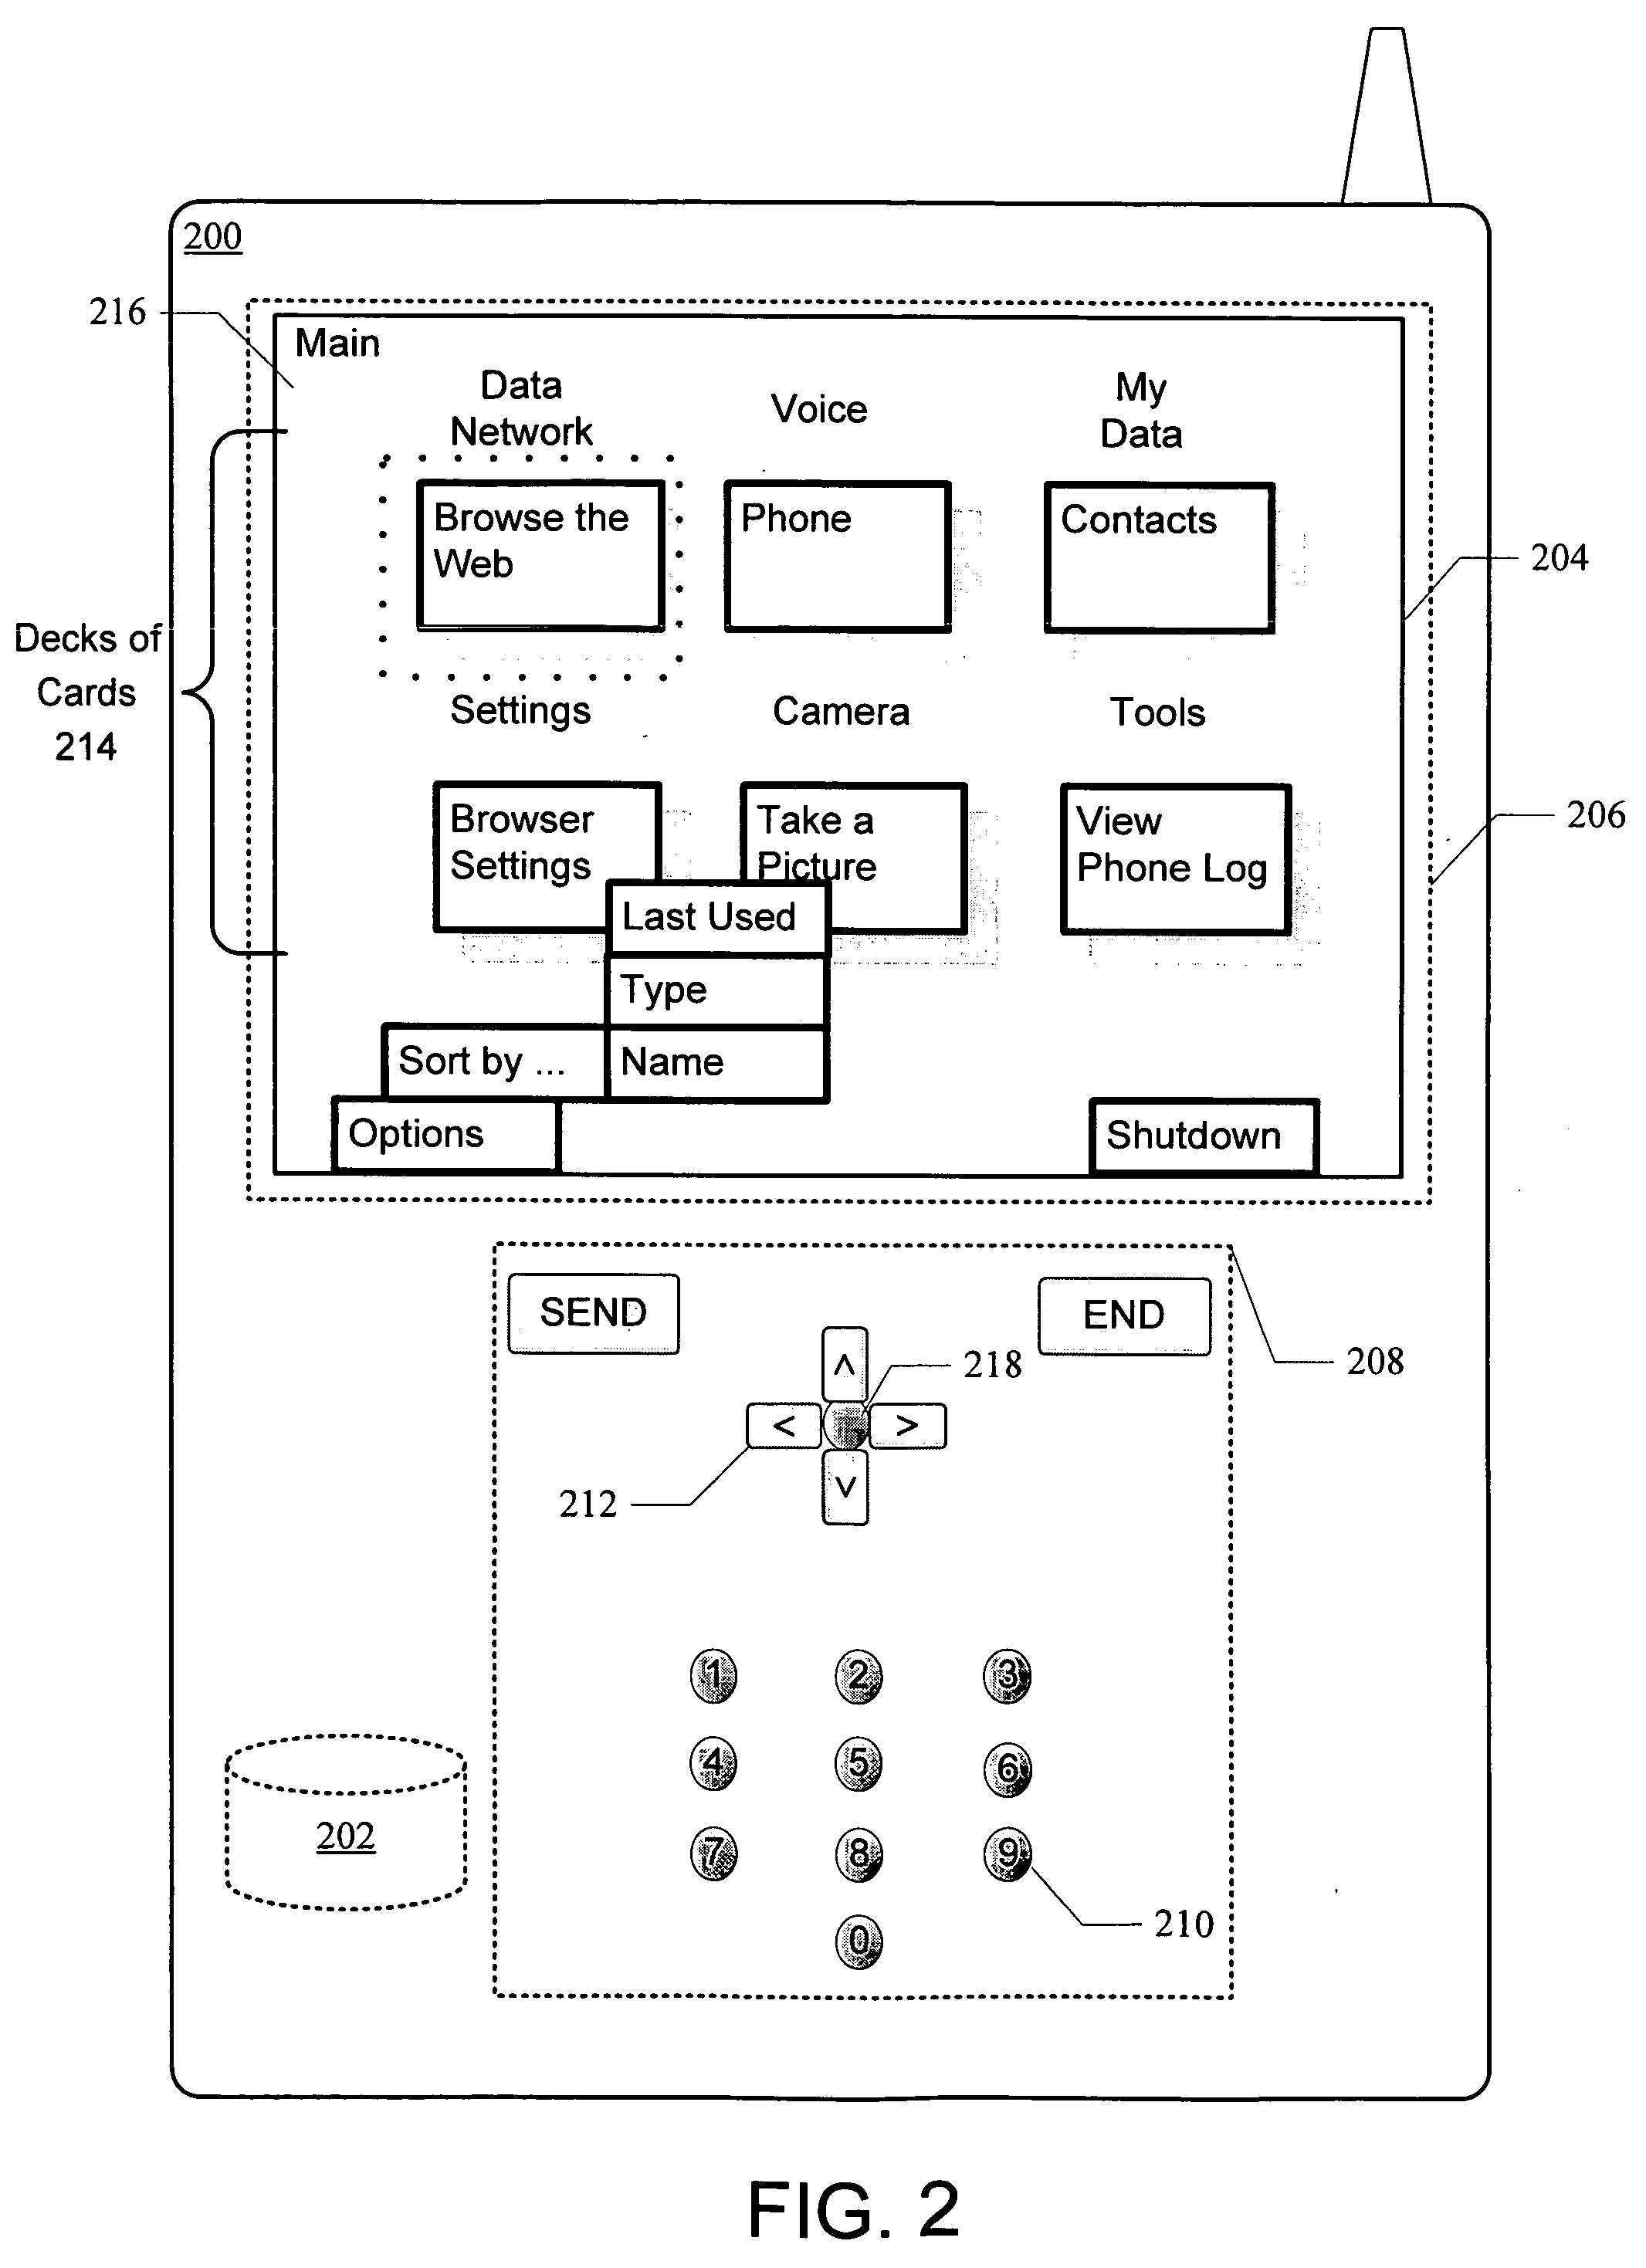 Method and system providing for navigation of a multi-resource user interface